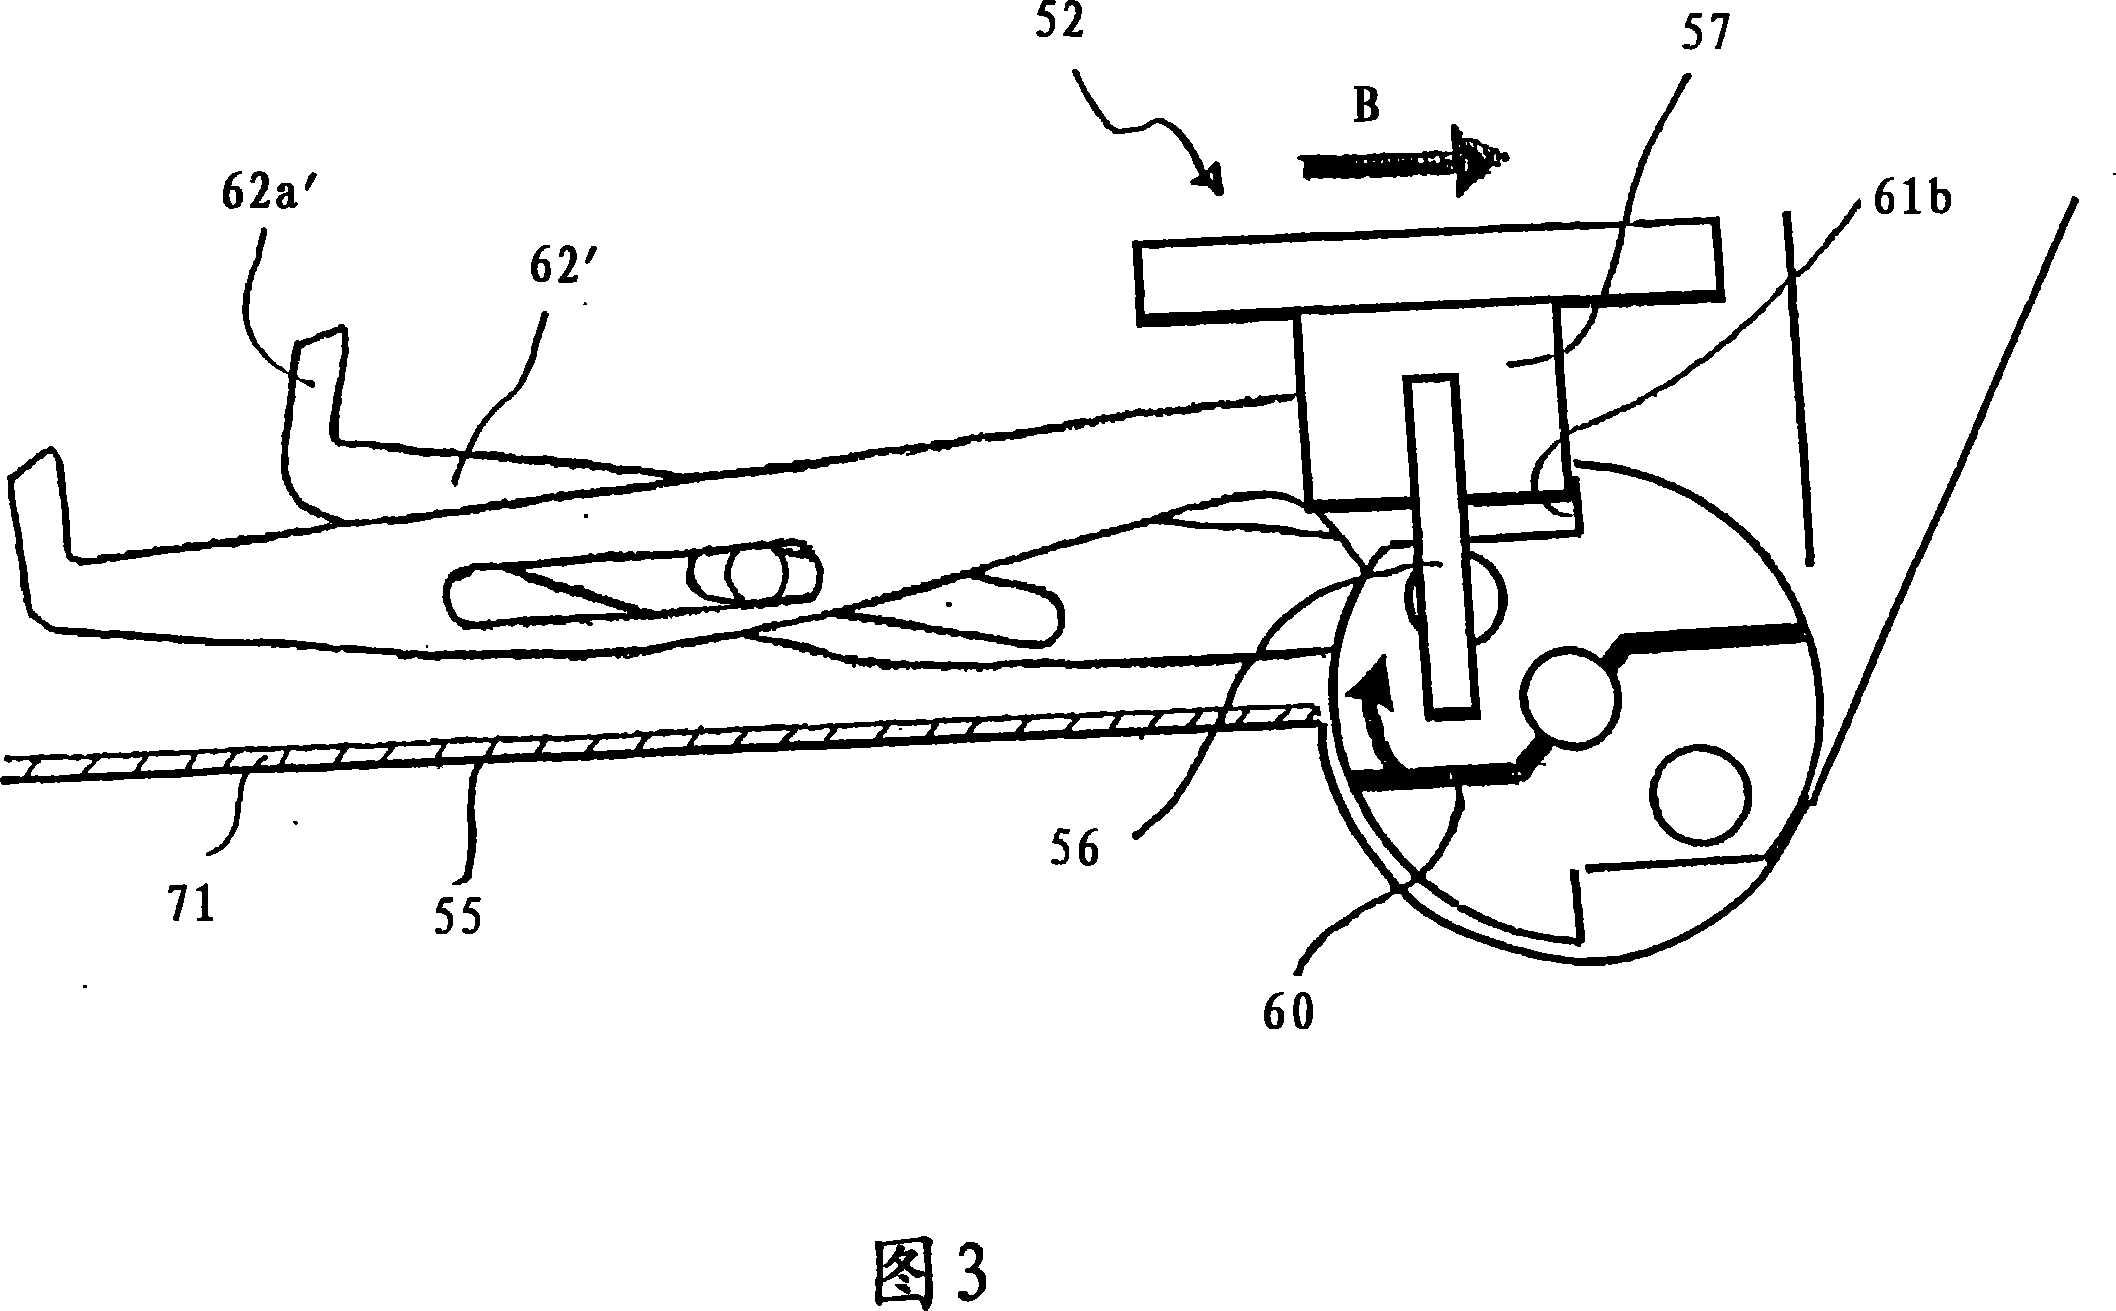 Device and method for applying layers of a powder material onto a surface